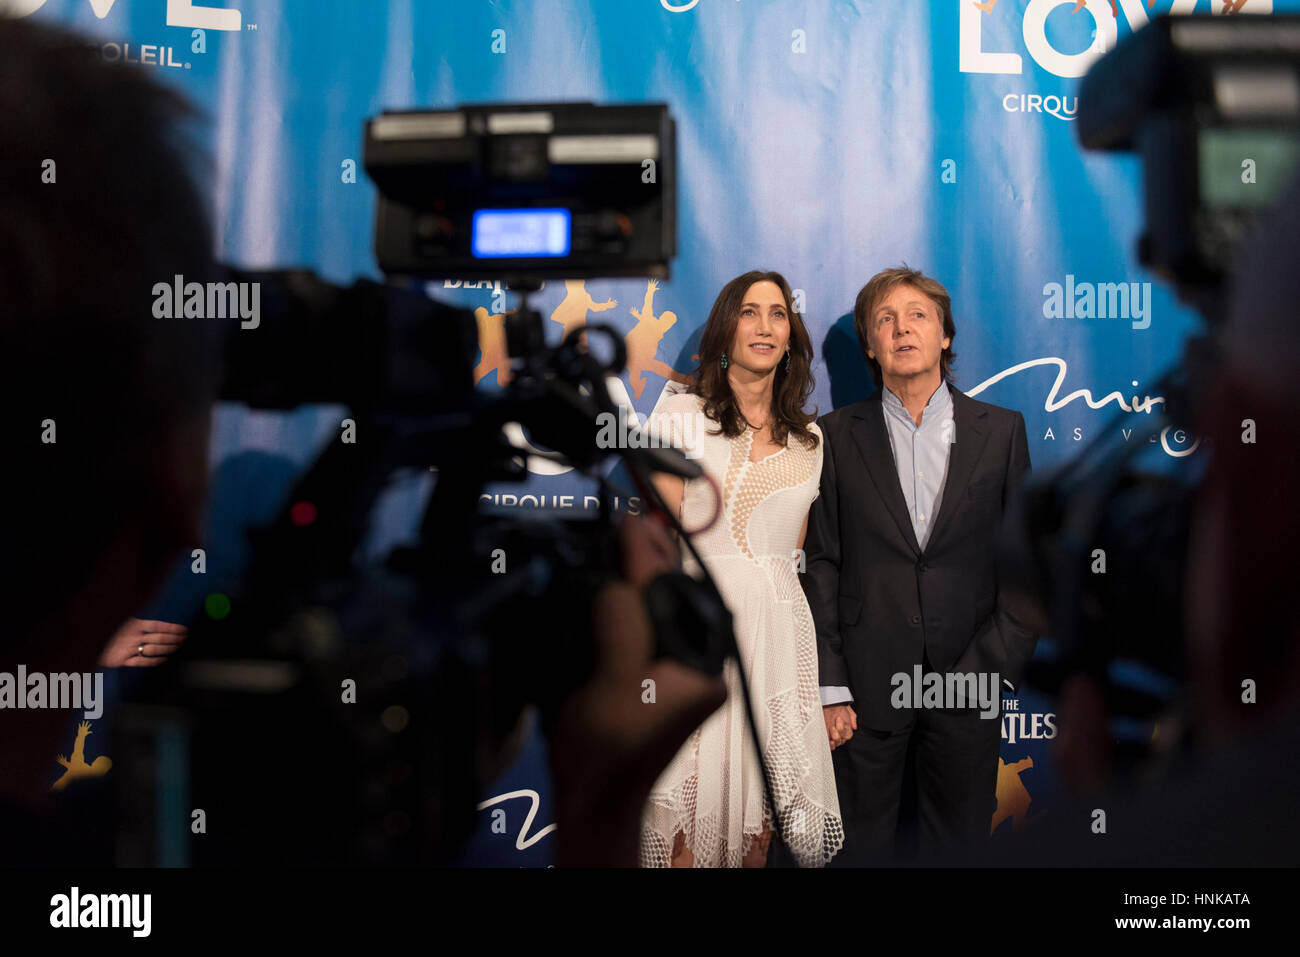 Paul McCartney, right, and his wife Nancy Shevell pose during a red carpet event in Las Vegas. Stock Photo